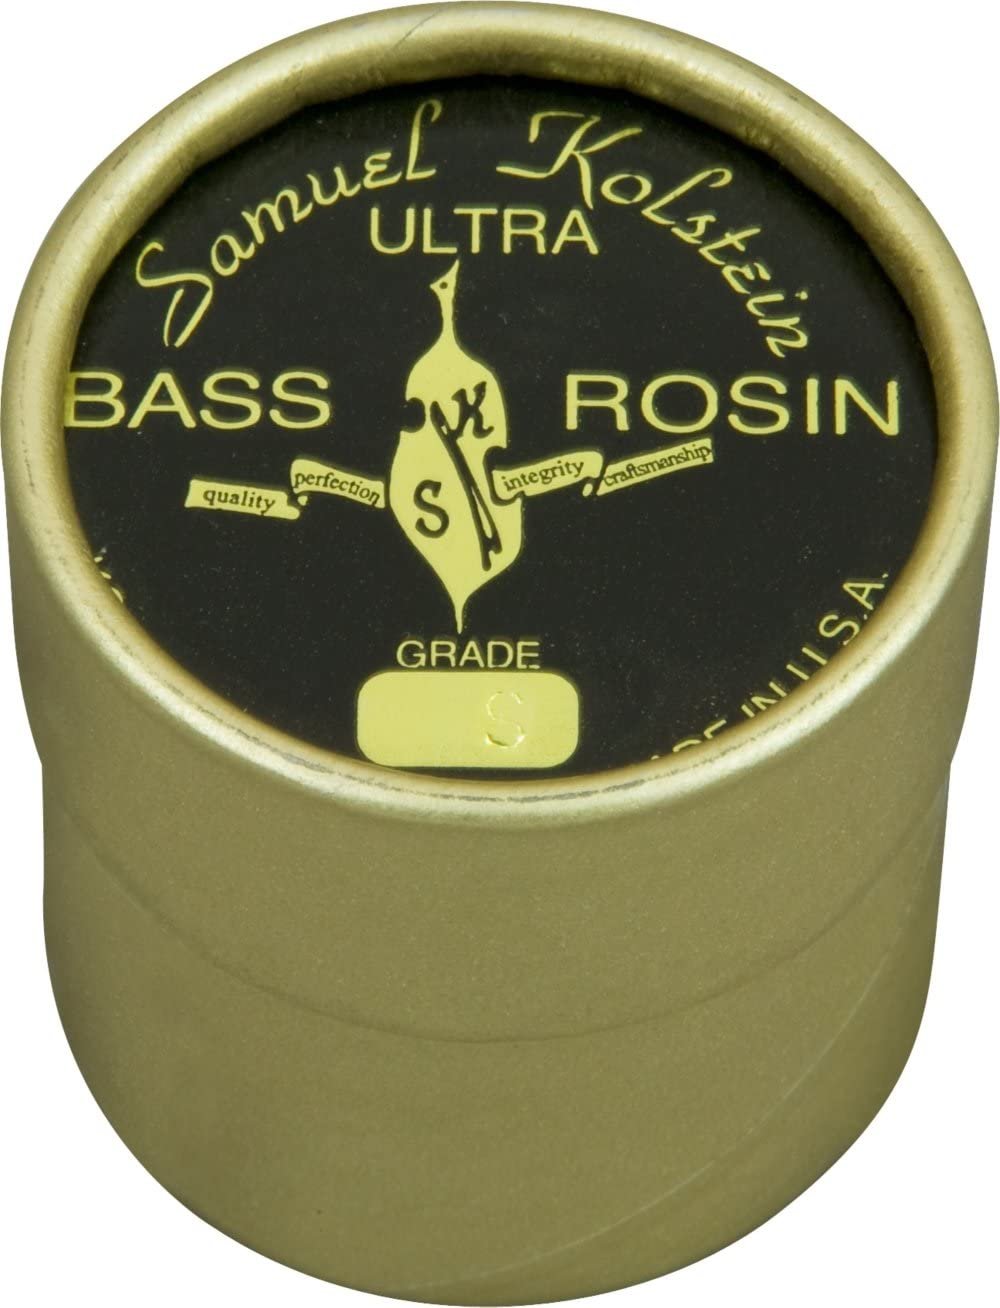 Kolstein Ultra Formulation Supreme Bass Rosin Soft KR-013 Low Powdering and Smooth, Easy Bowing Rosins, Resin